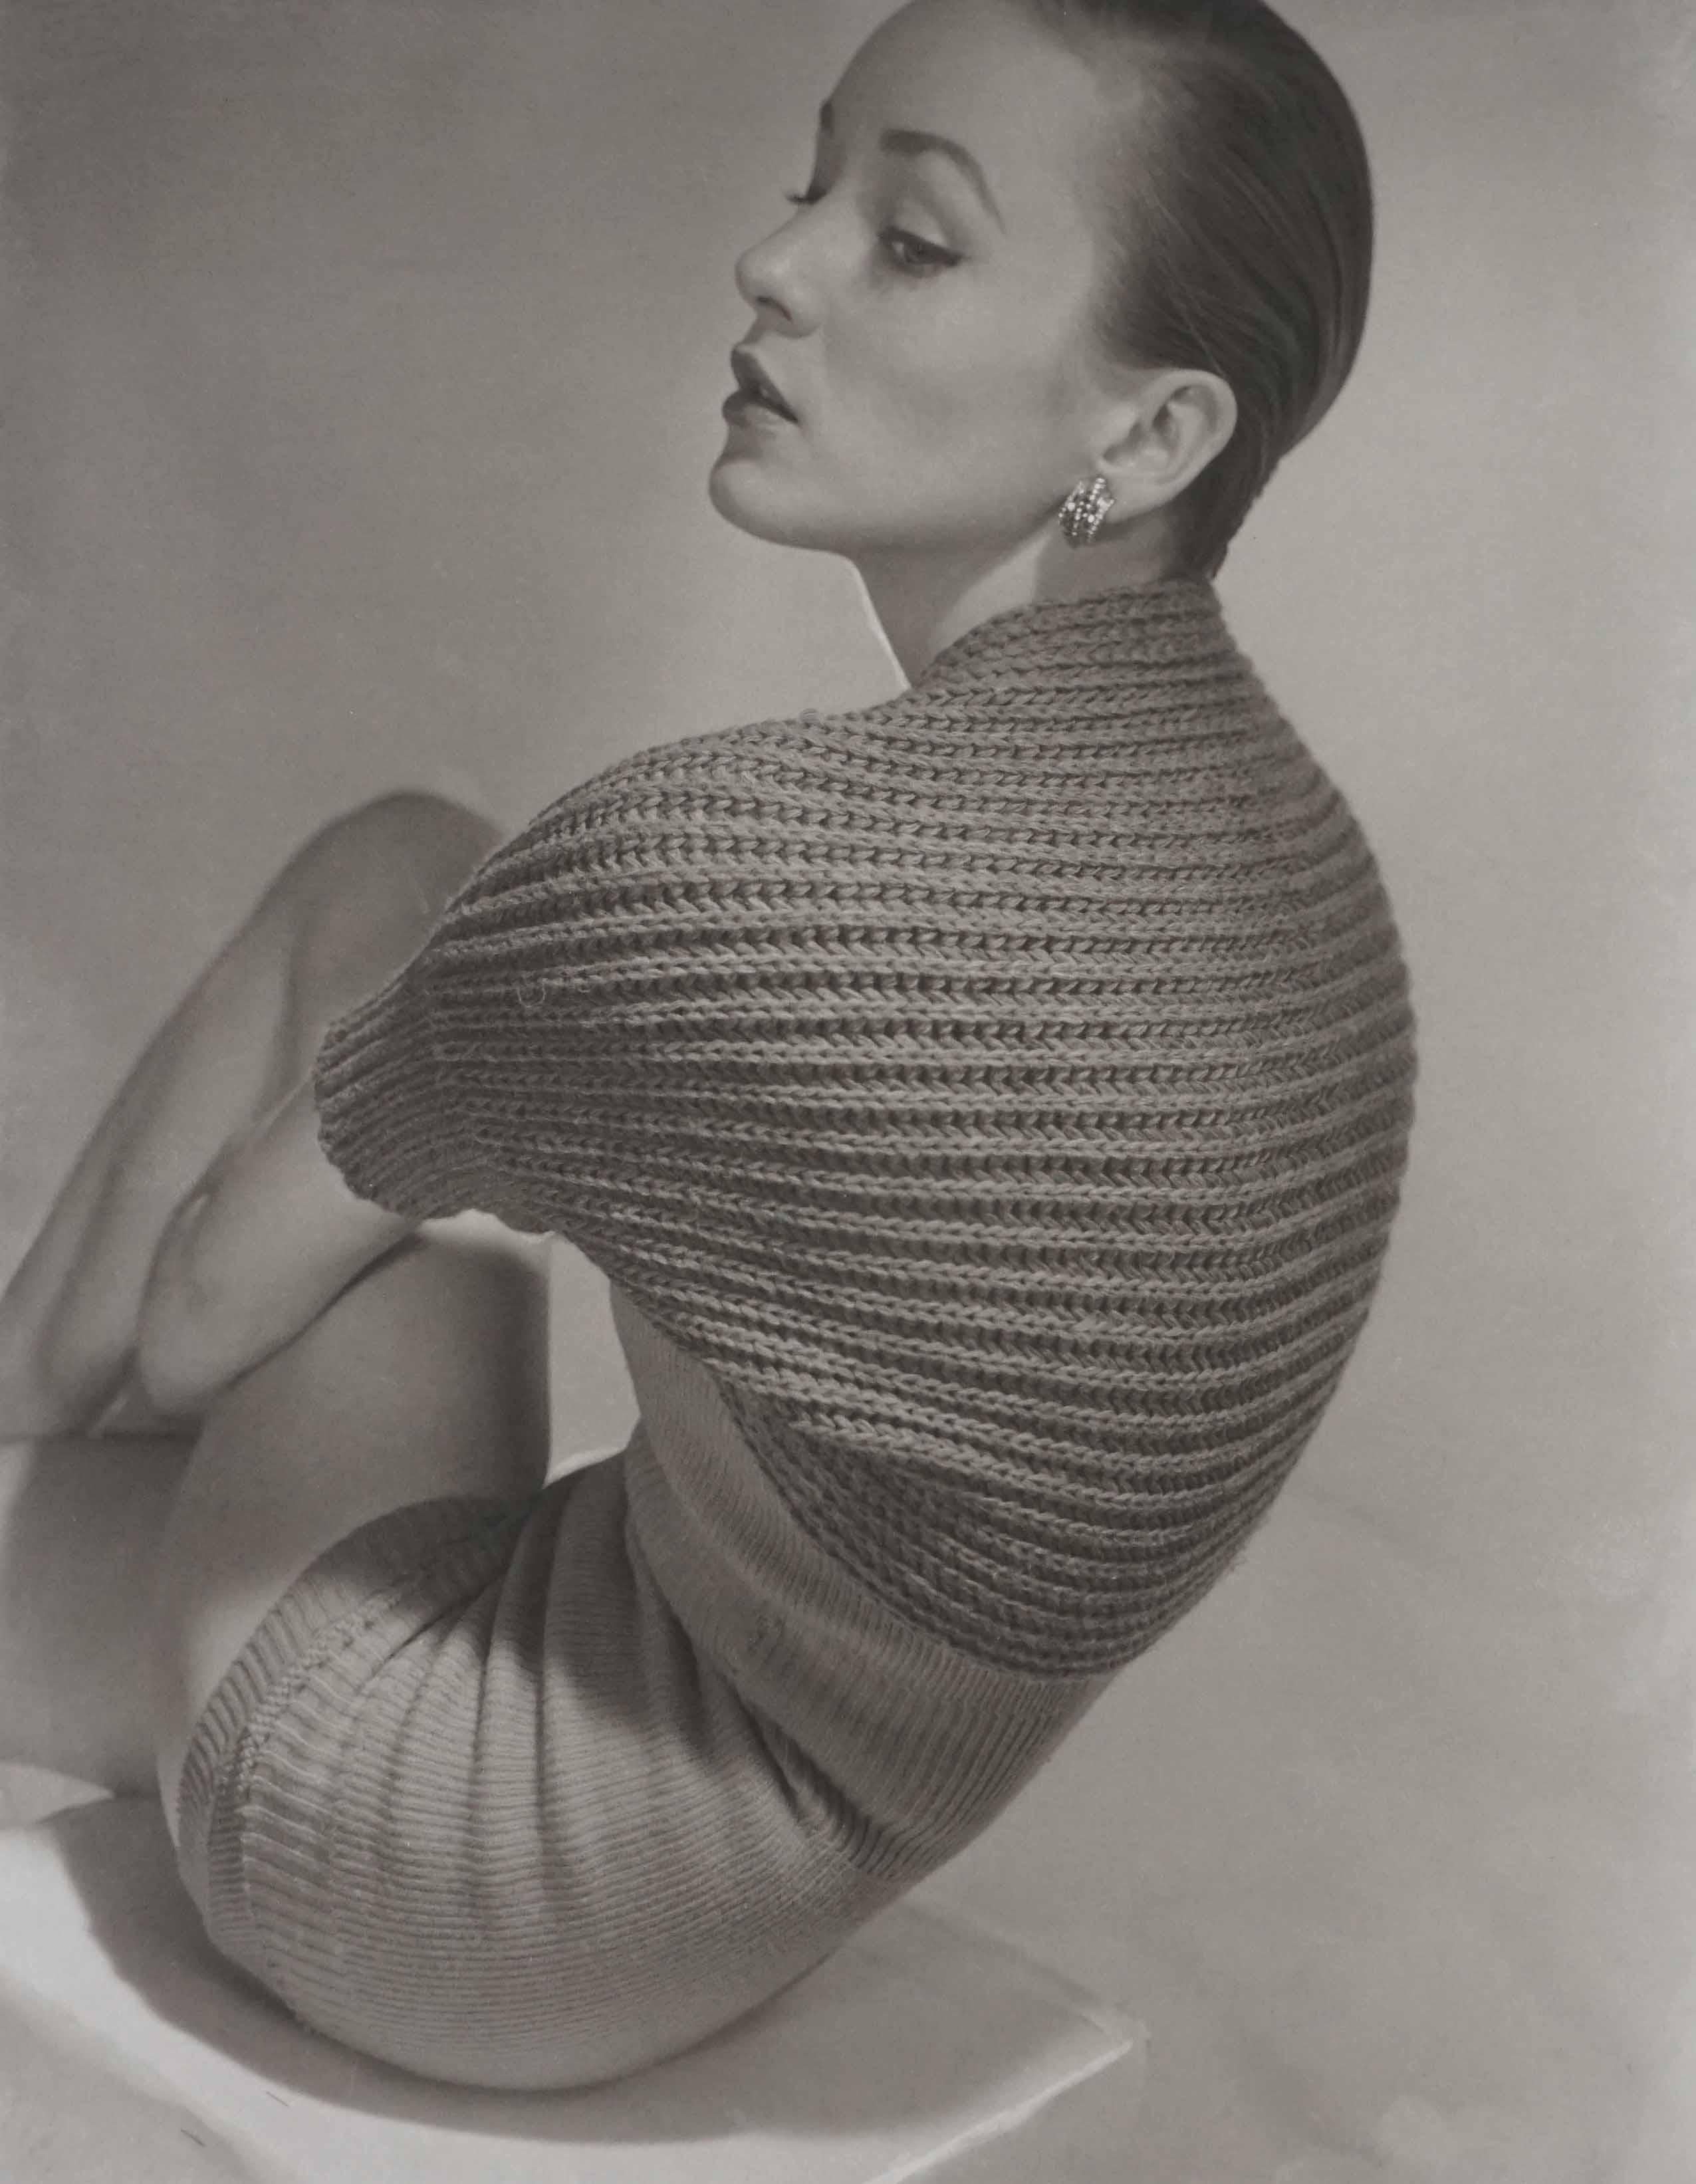 Horst P. Horst Black and White Photograph - Body Sweater by Tina Leser, 1950